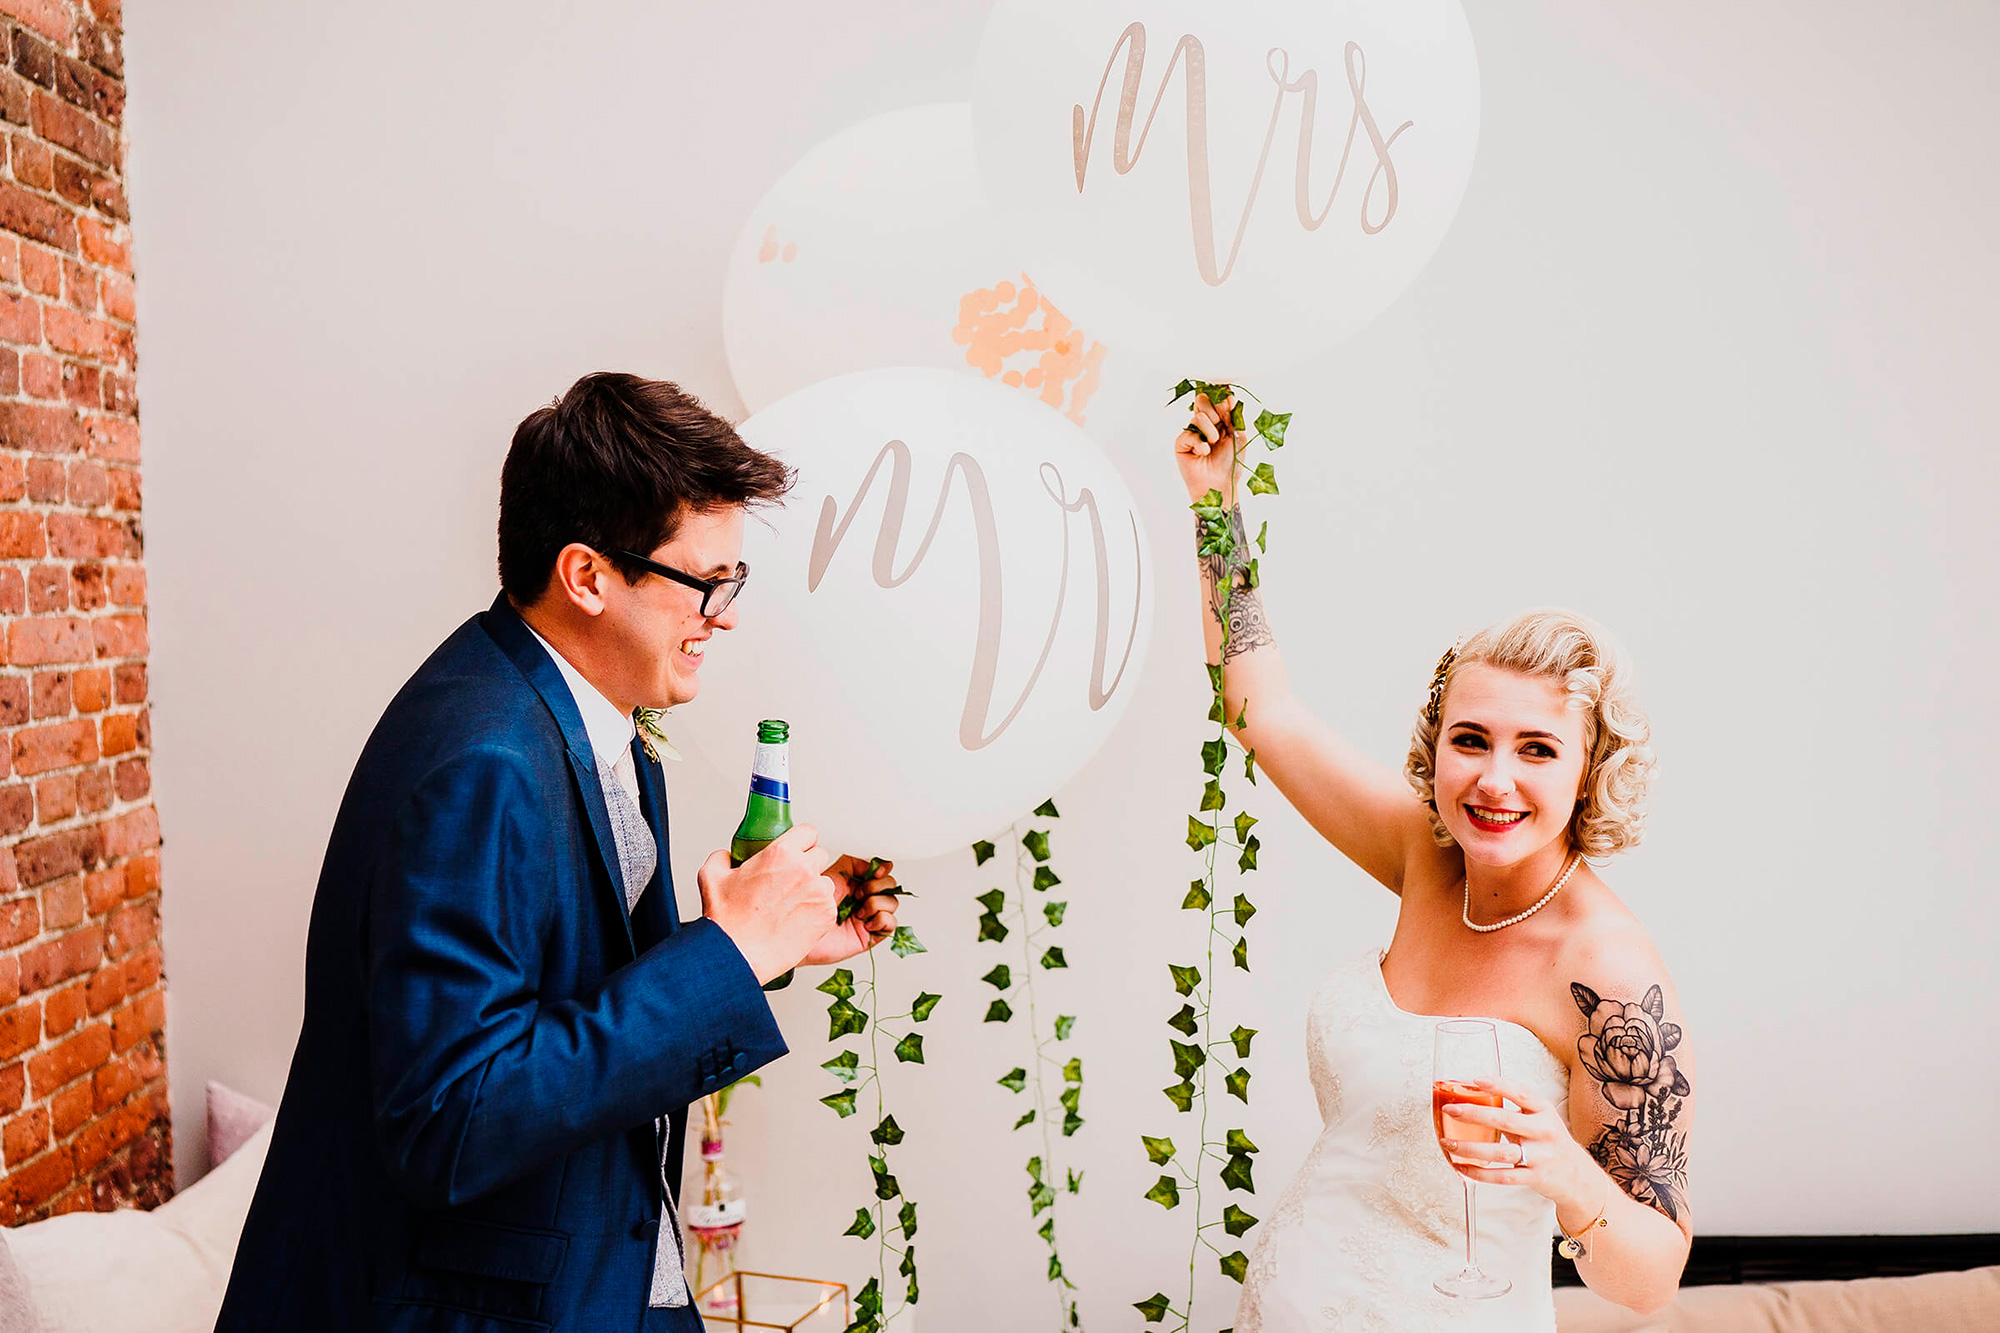 Lucy Simon Rustic Quirky Wedding Rob Dodsworth Photography 037